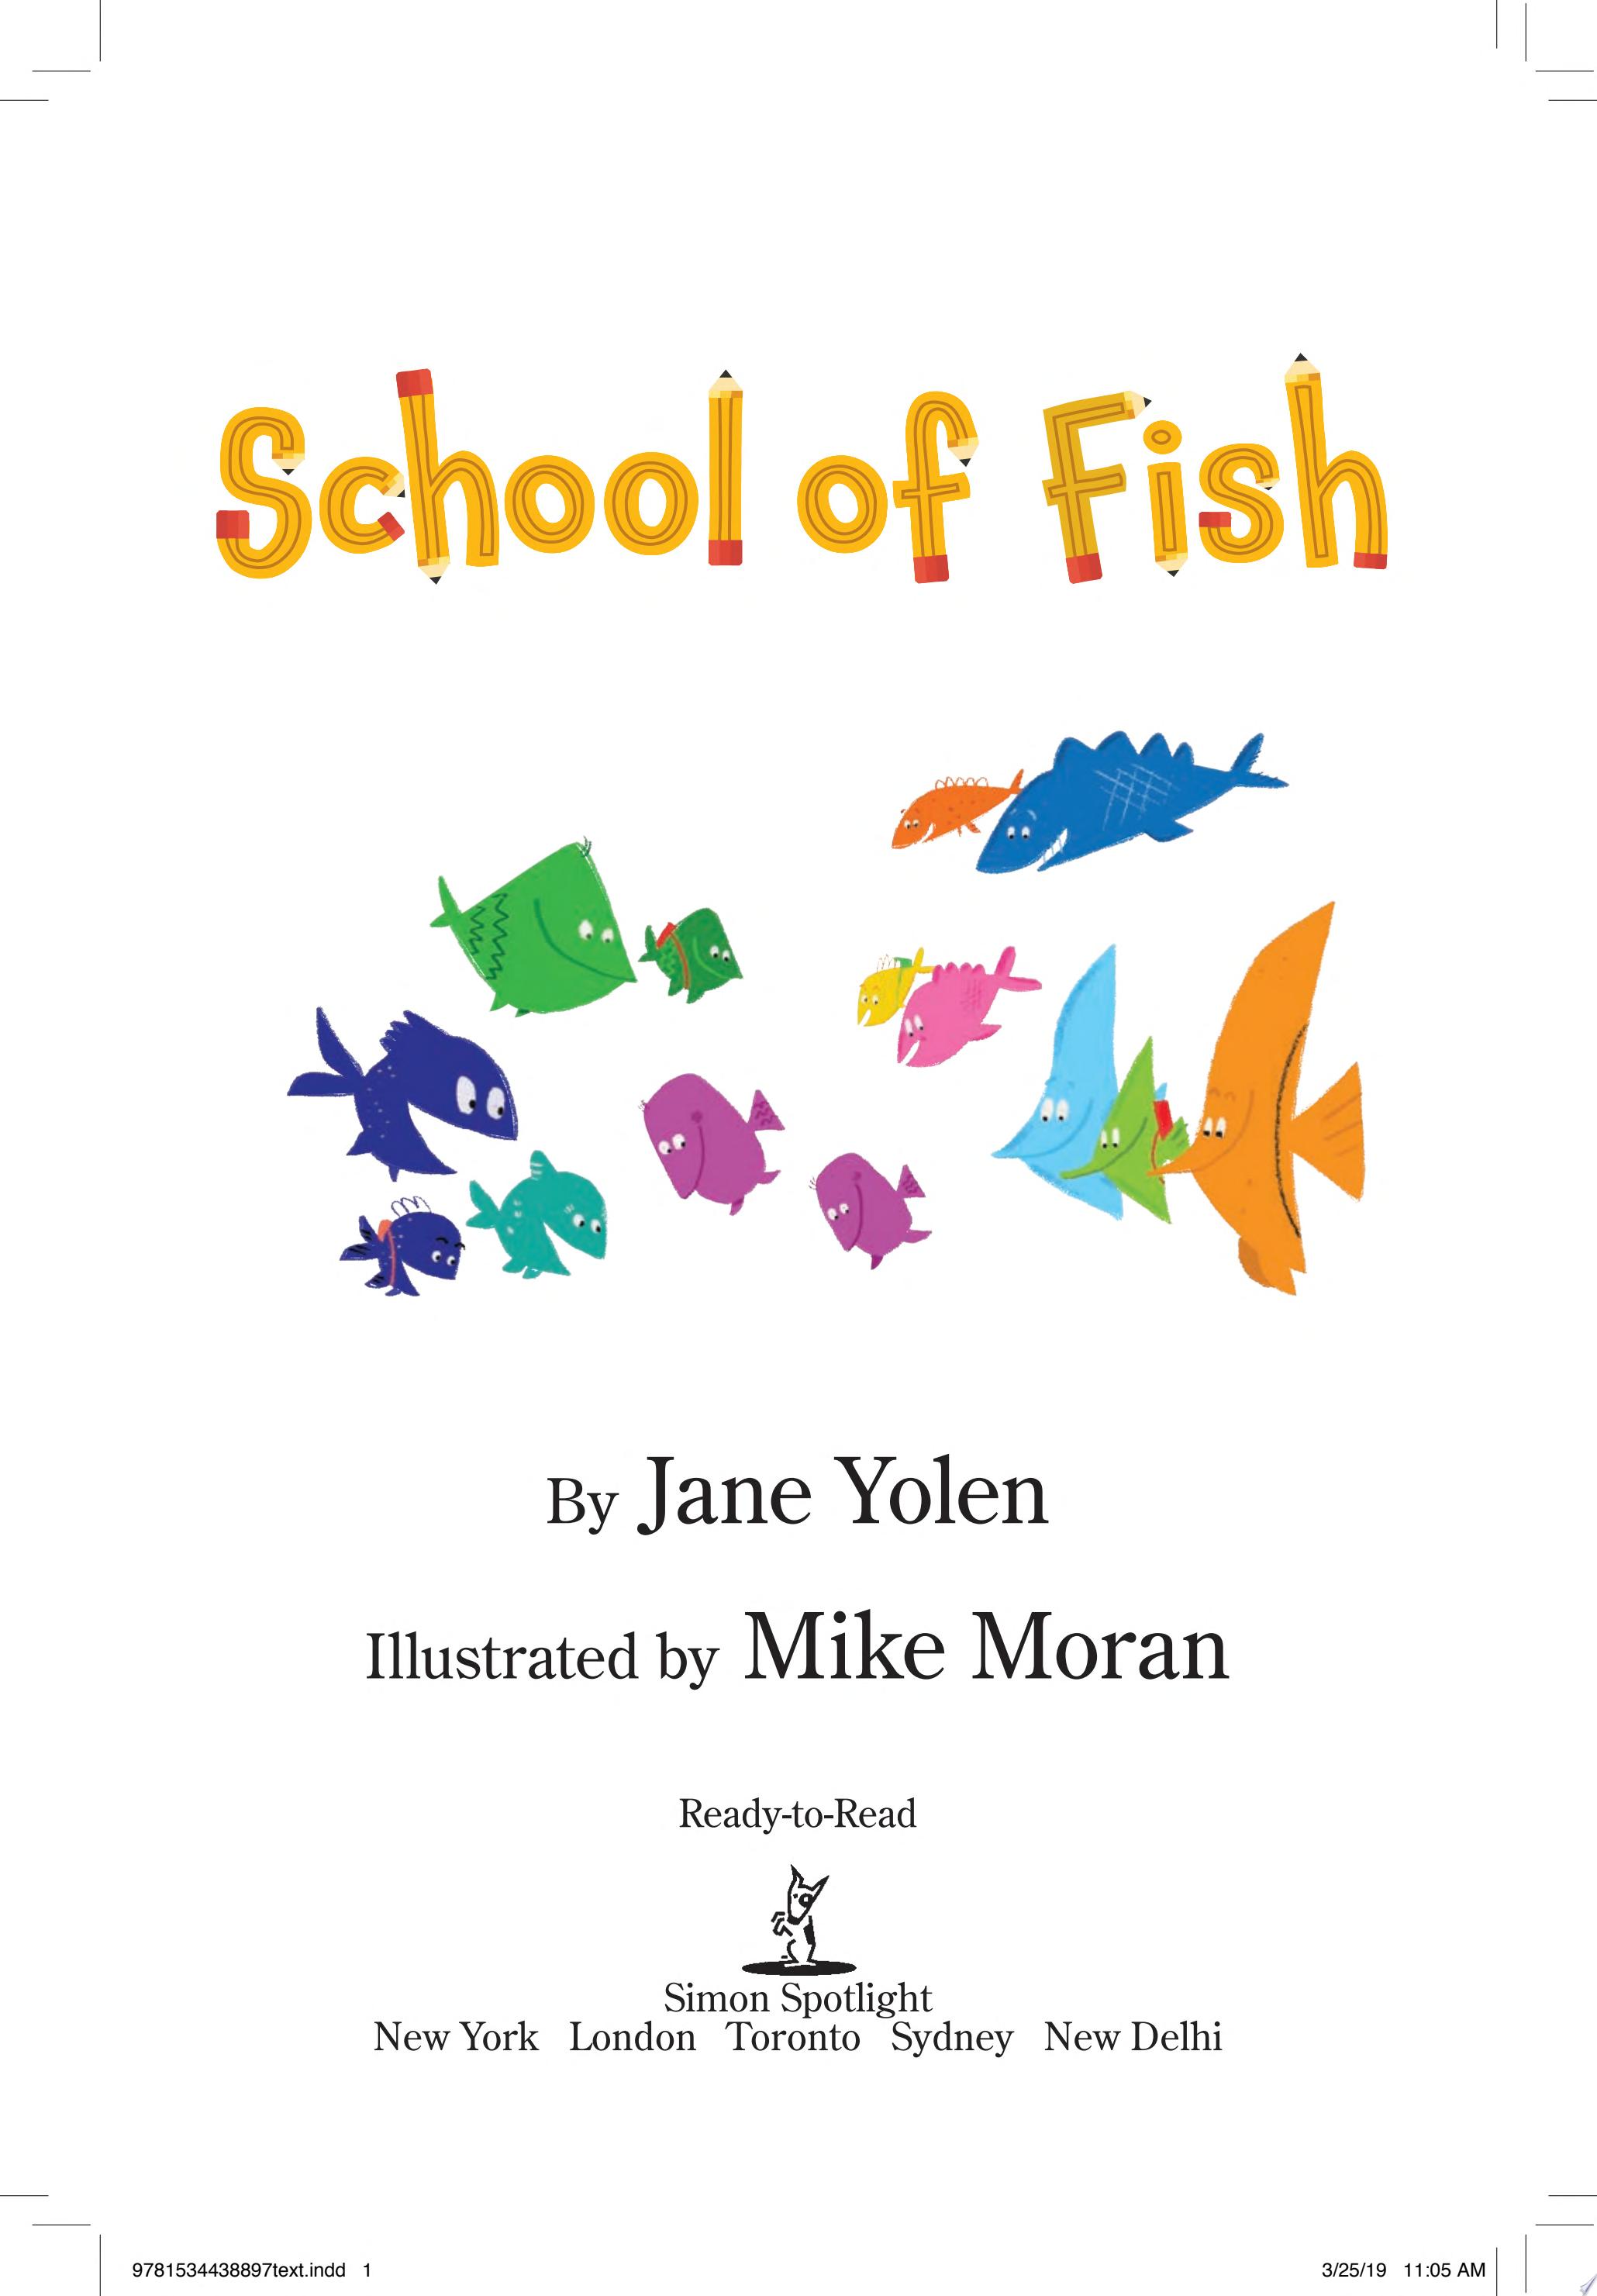 Image for "School of Fish"